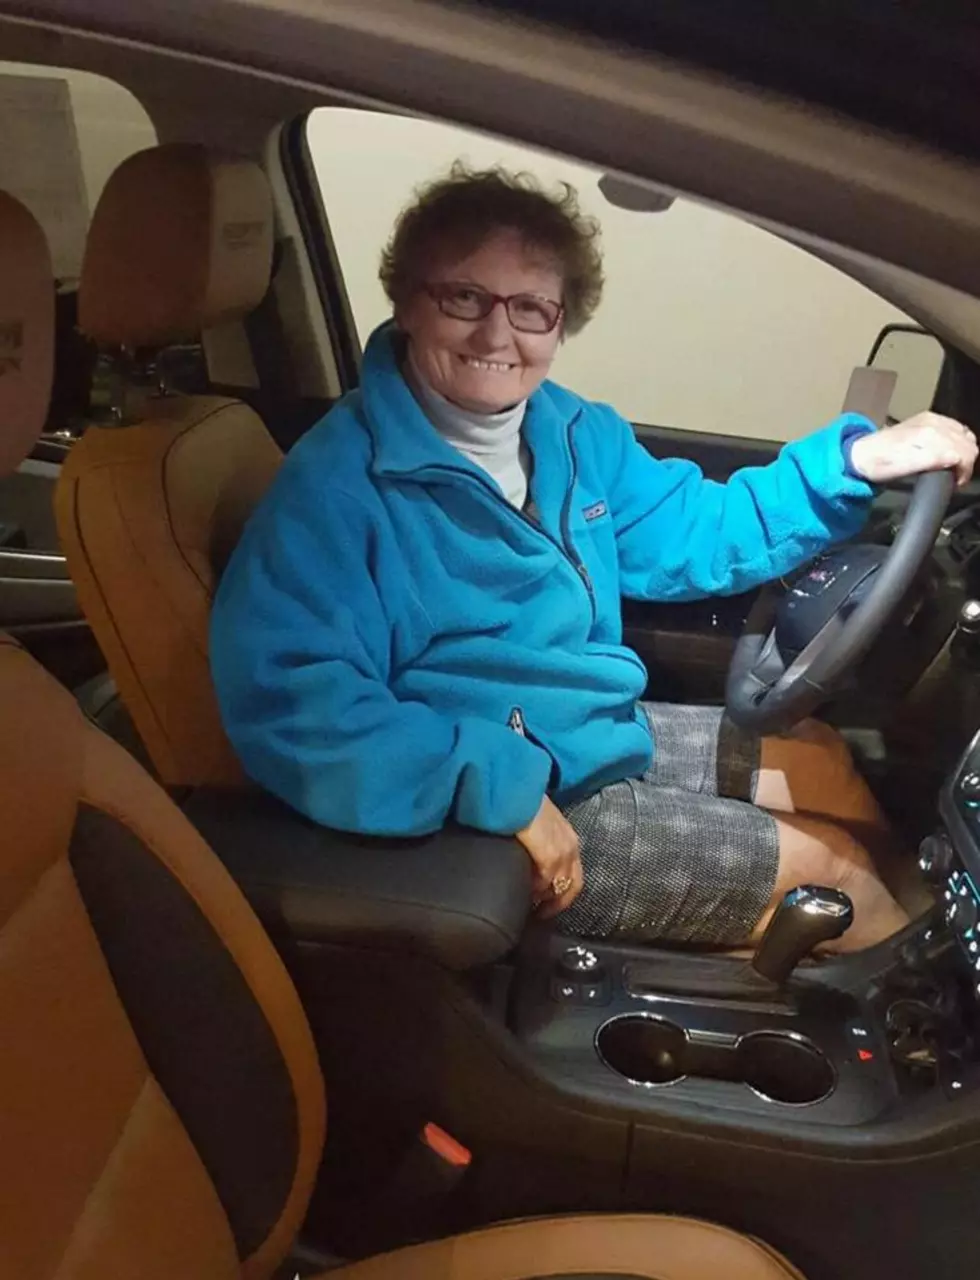 Wyoming Driver’s Education Teacher Wins A Brand New Car